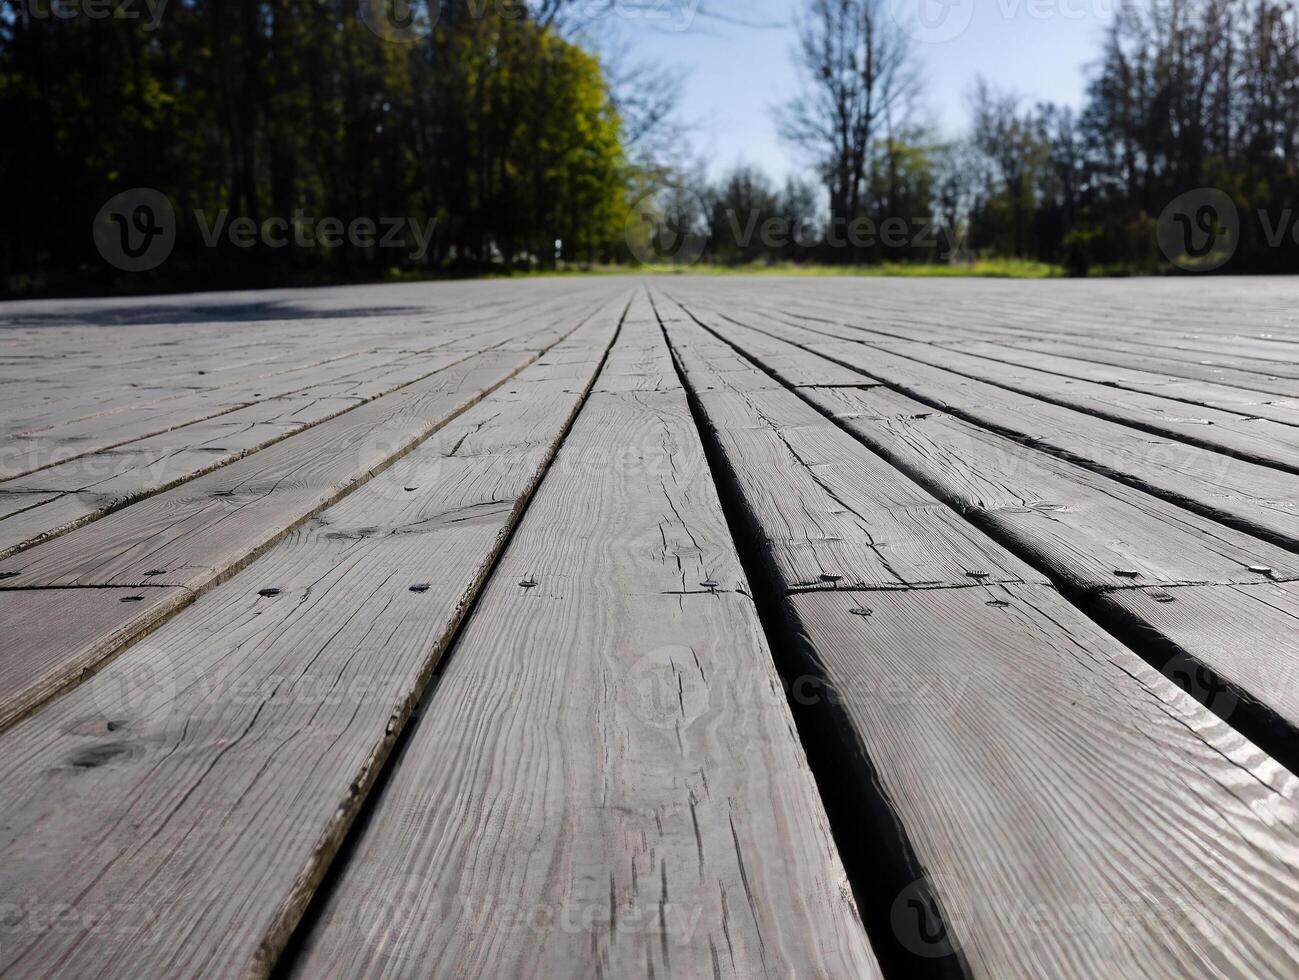 Boardwalk by the garden, wooden plank, decking, walkway, path or terrace, low angle view image of patio deck with blurred green background, copy space photo